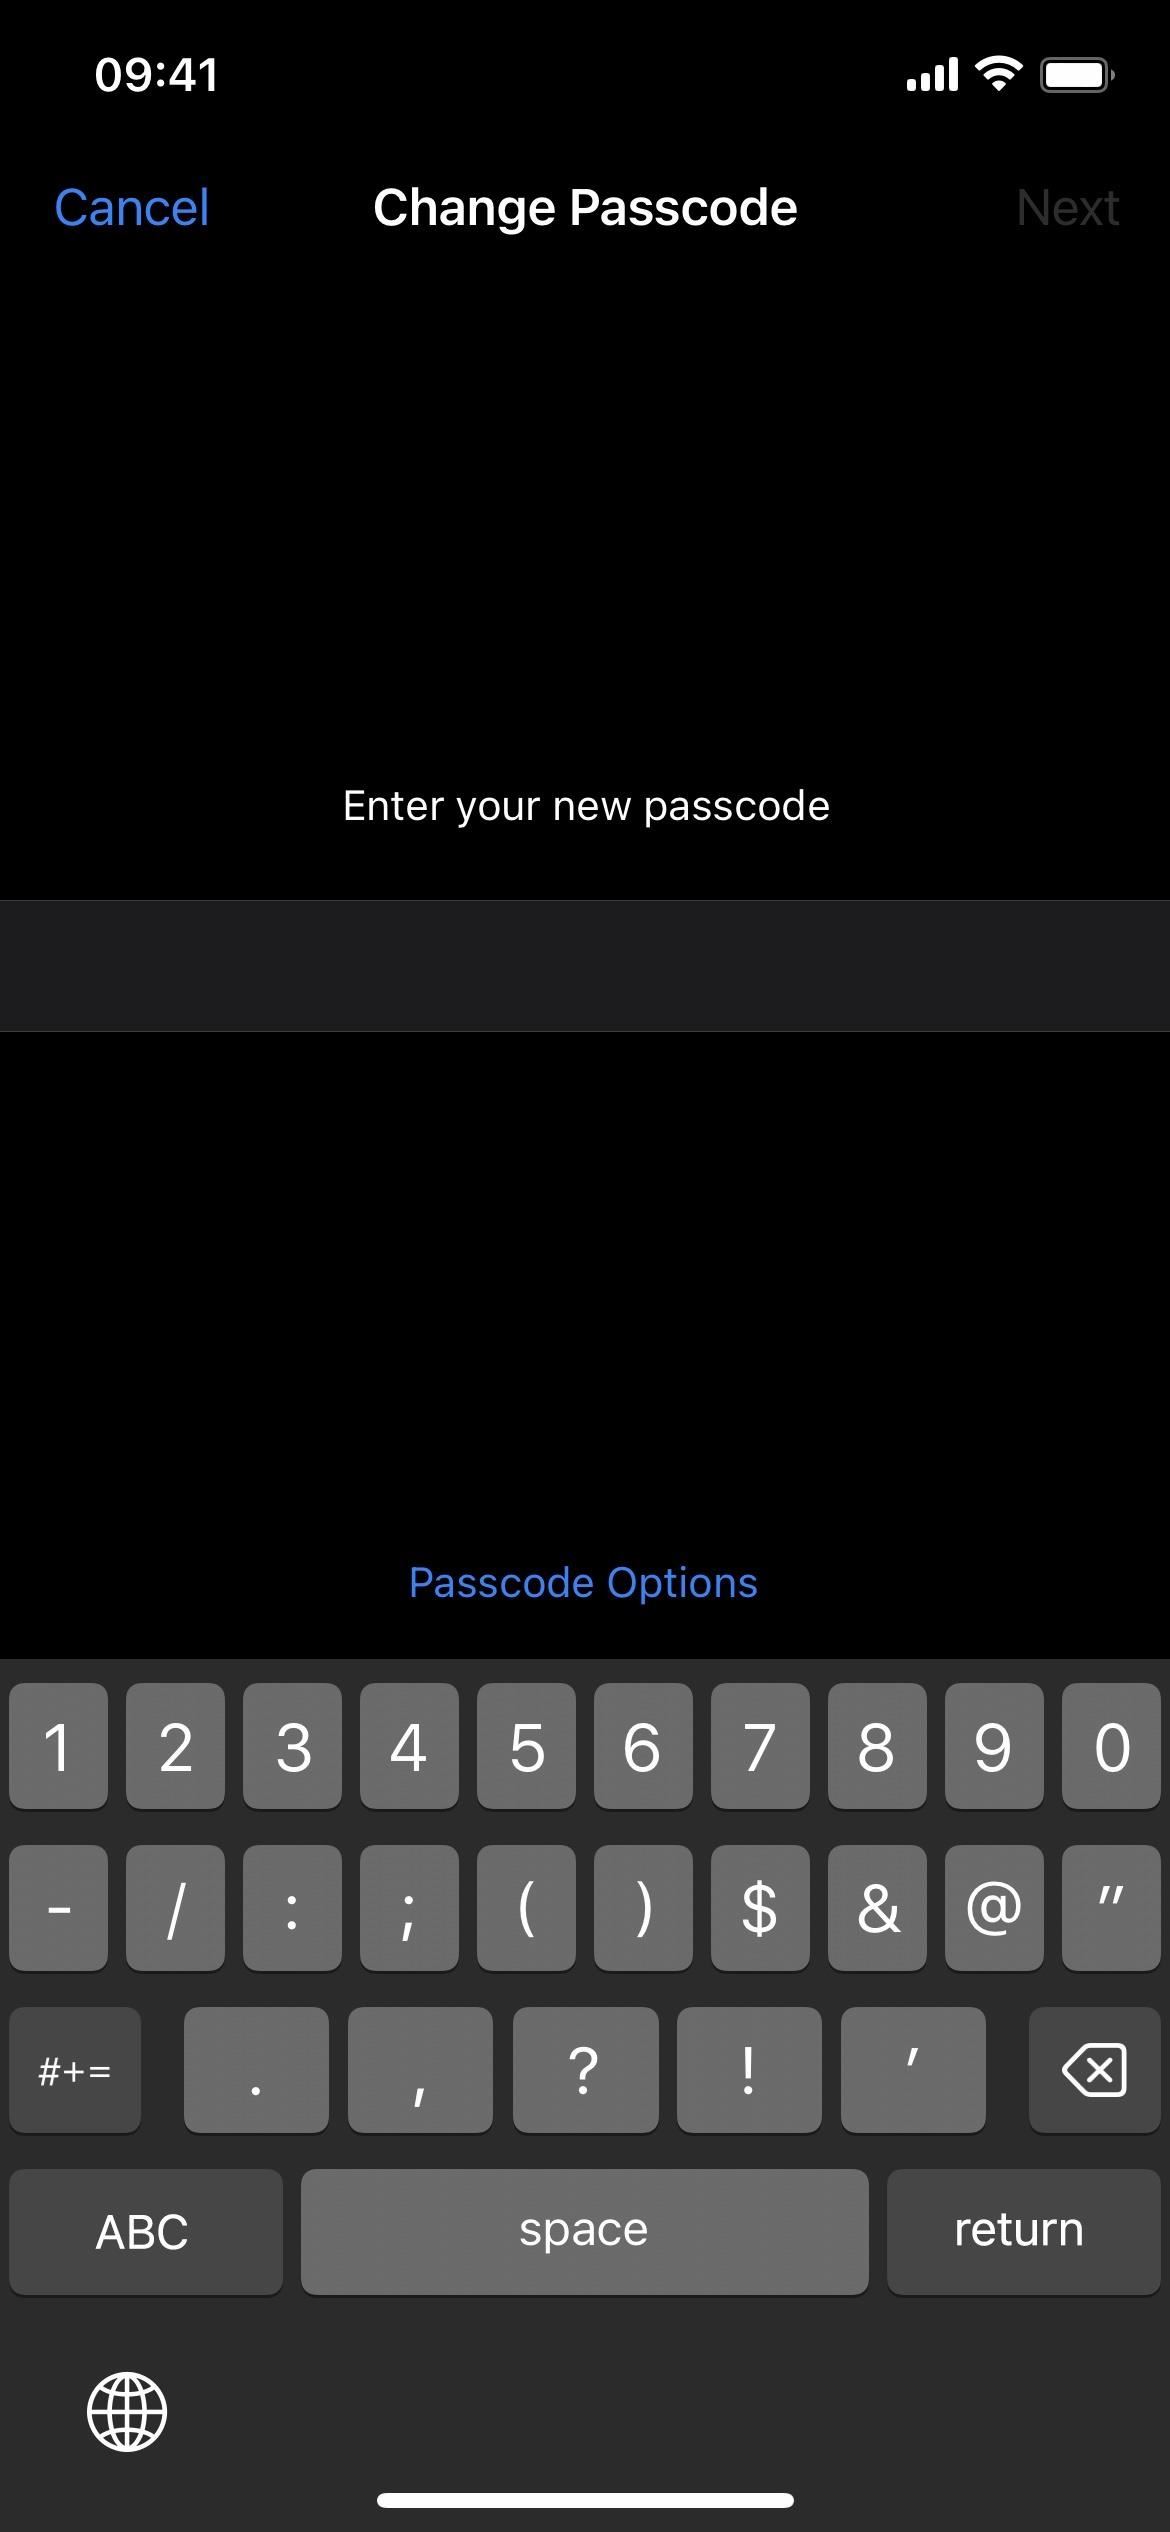 Change This One Thing on Your iPhone to Make Your Passcode Nearly Impossible to Hack